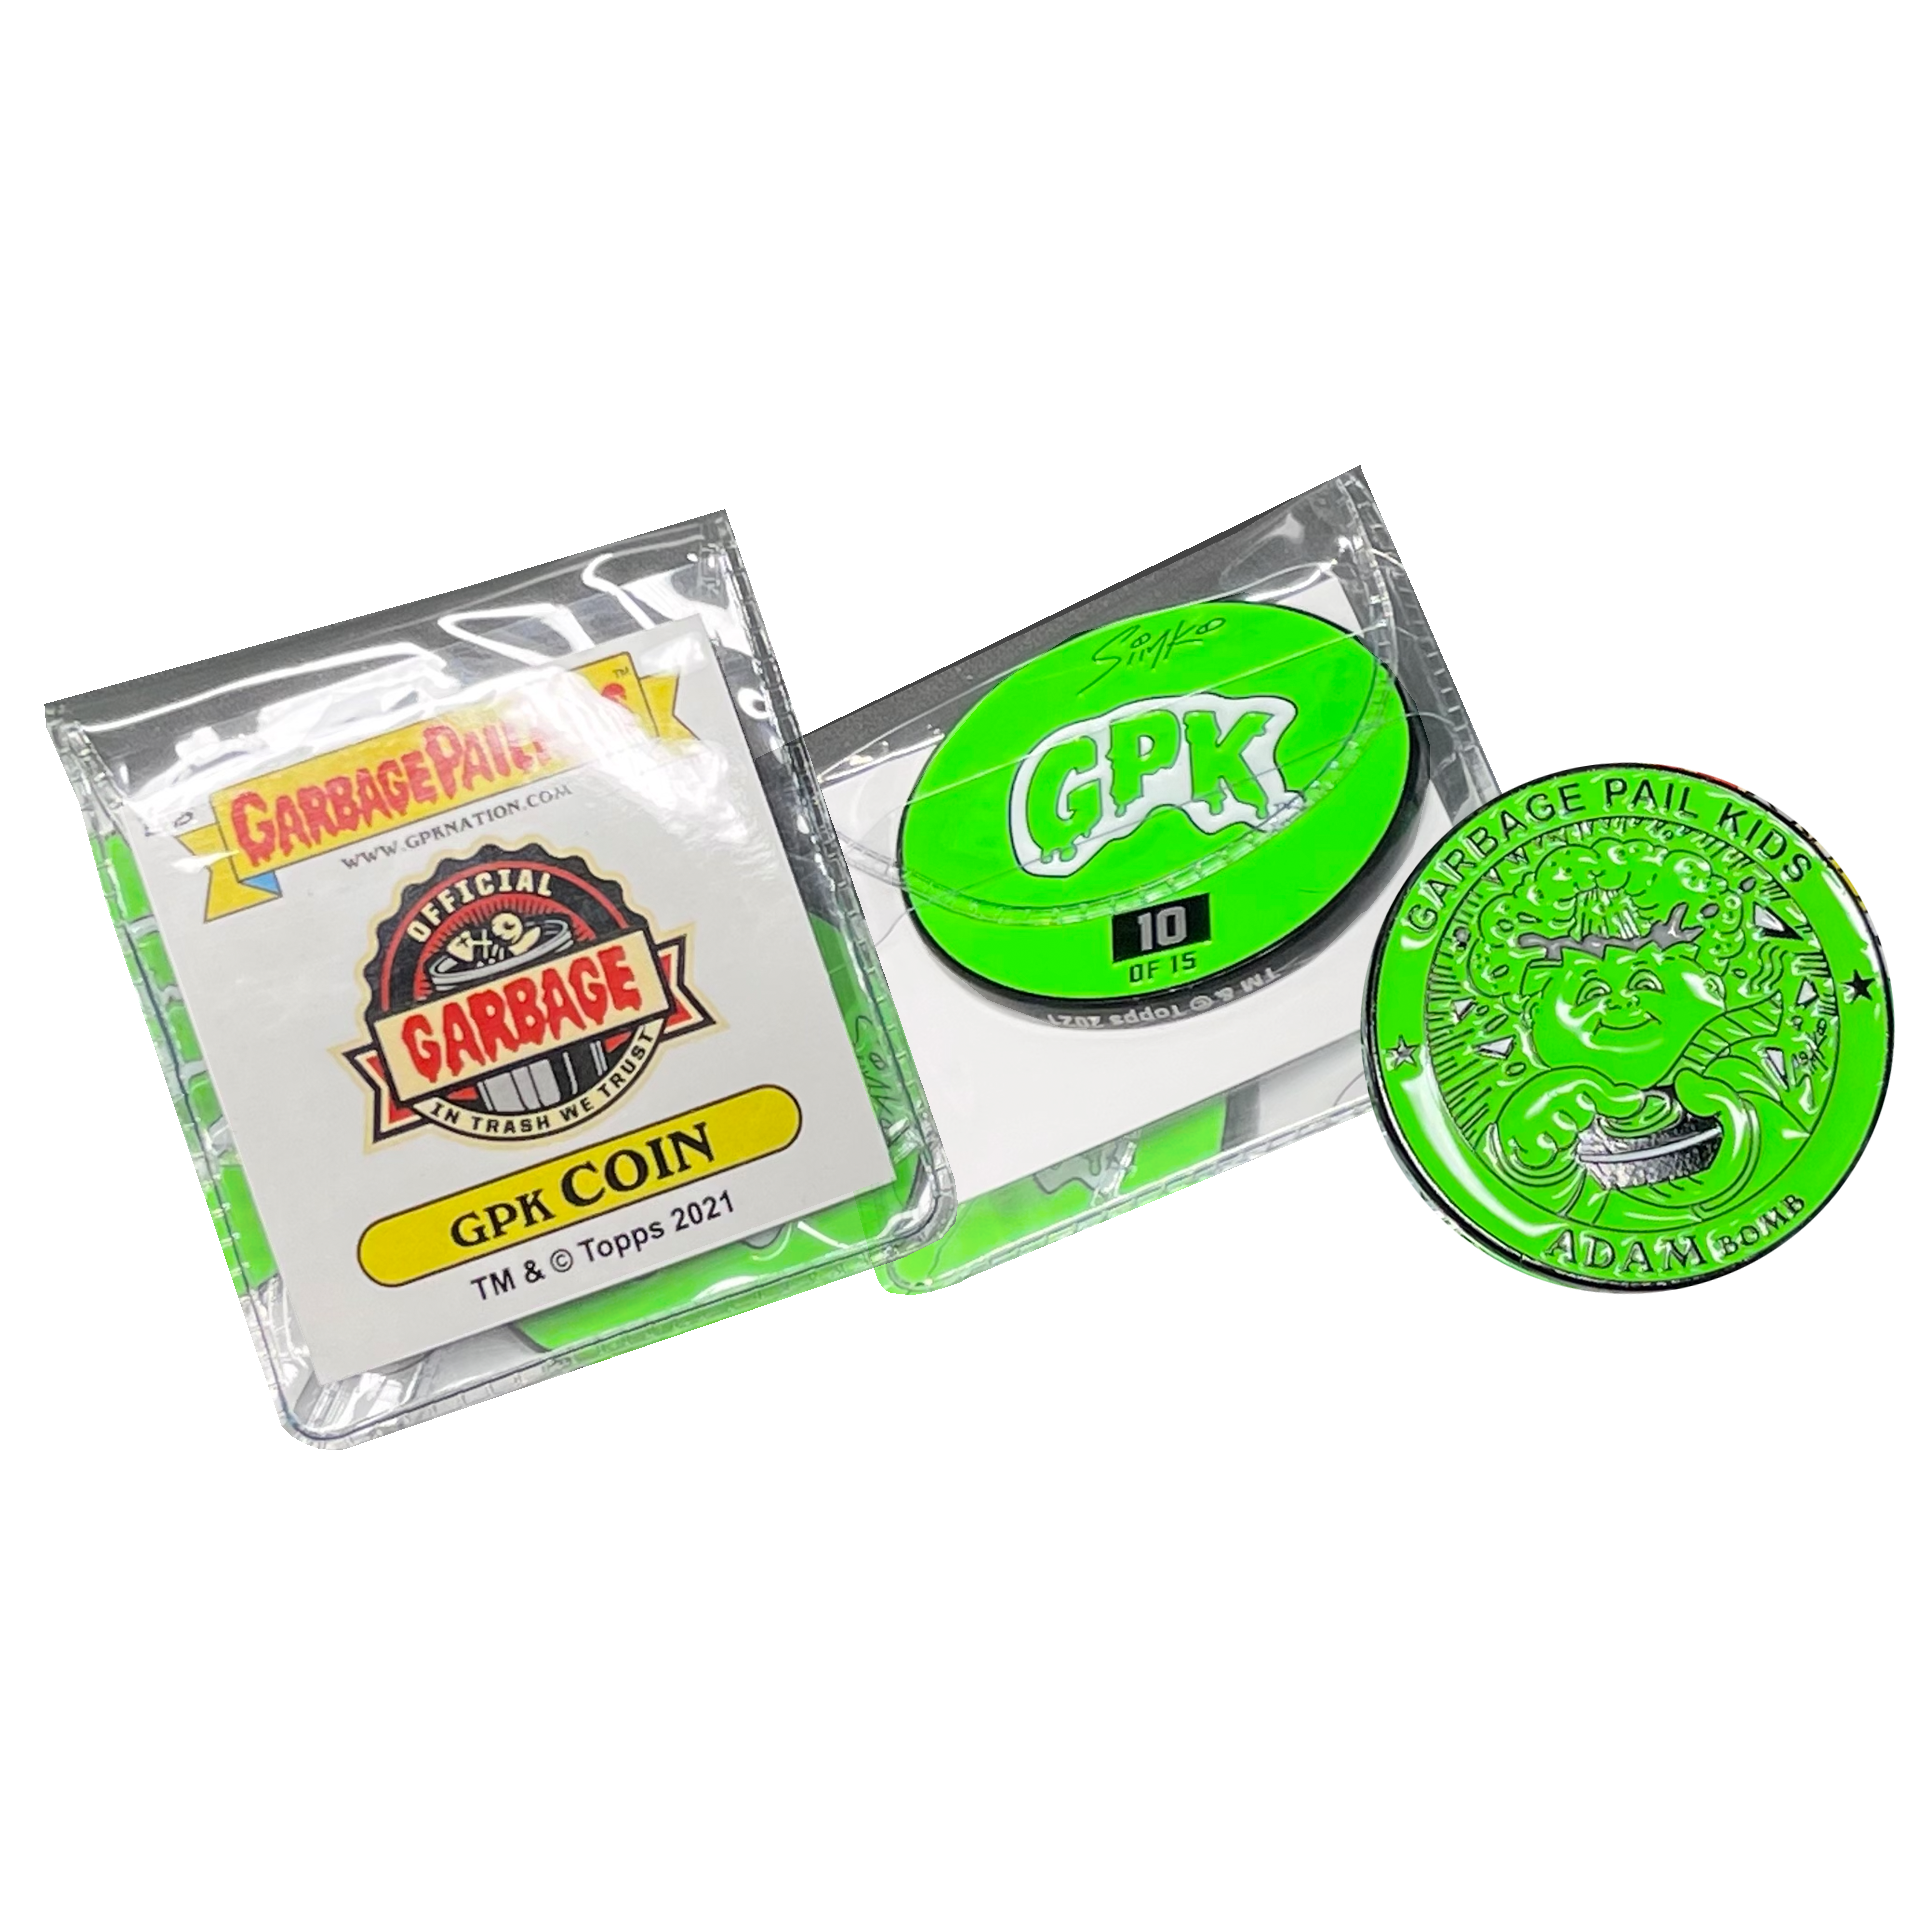 Super Limited Edition SIMKO GPK Green Mini Variation Coin: only 15 made